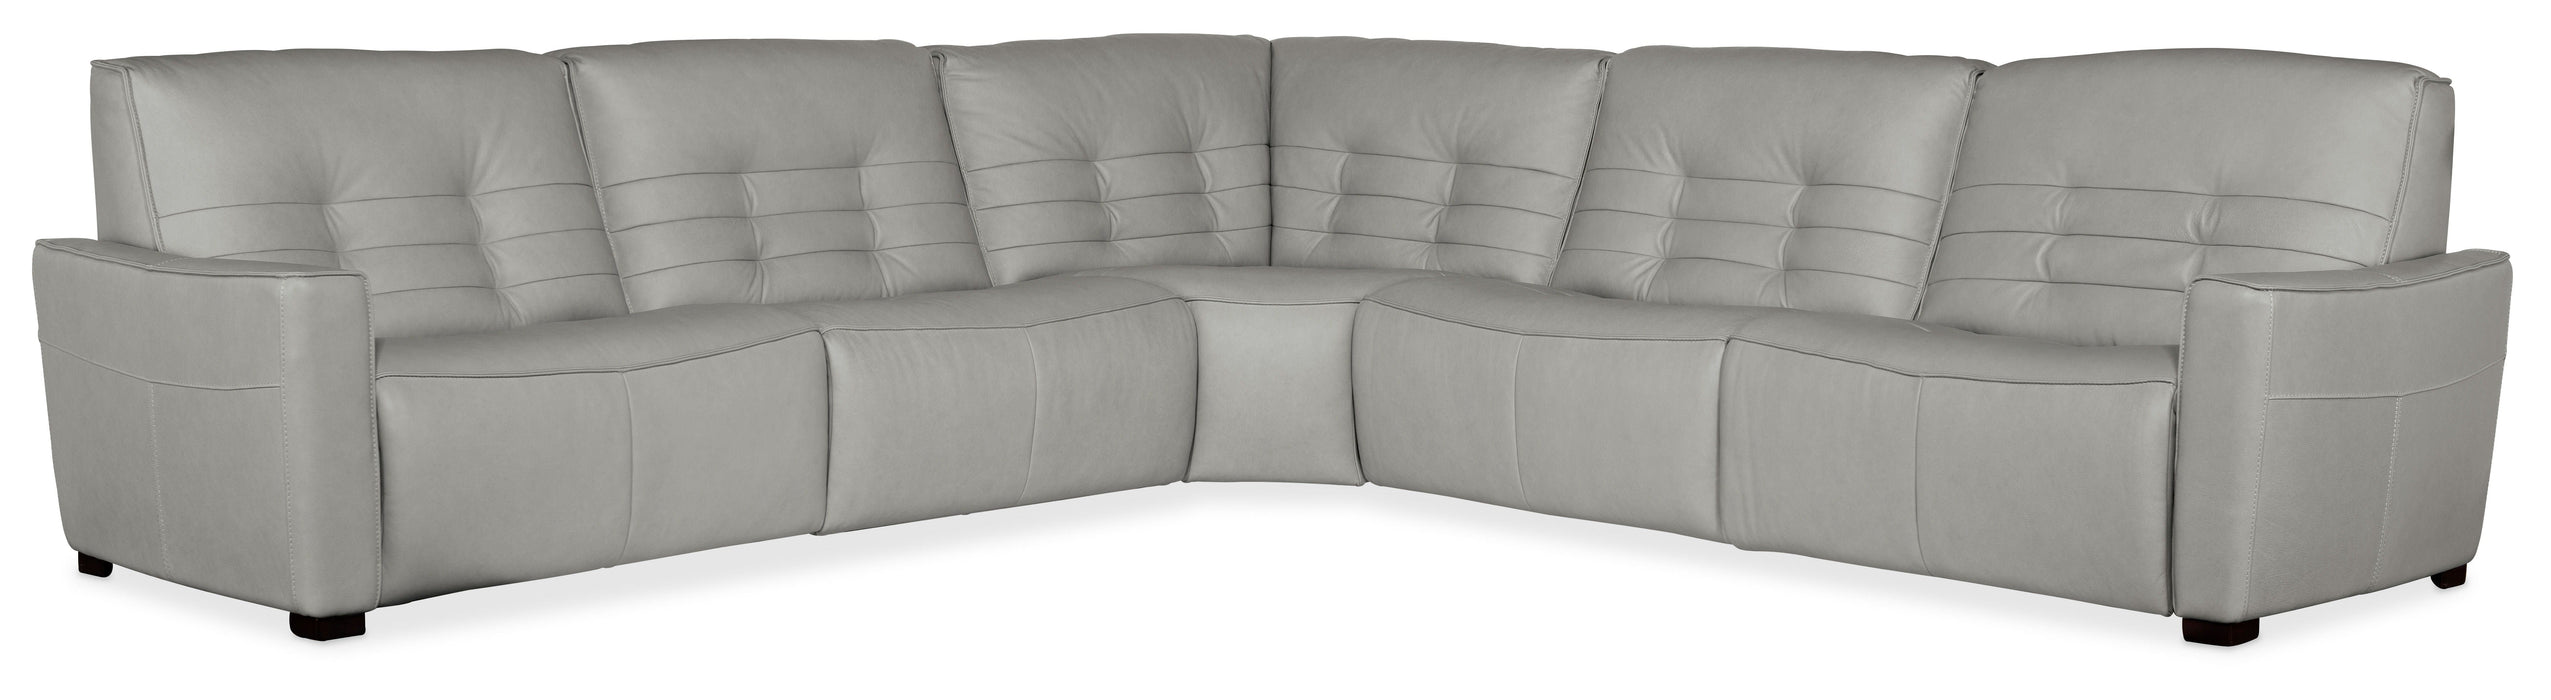 Reaux 5-Piece Power Recline Sectional With Power Recliners